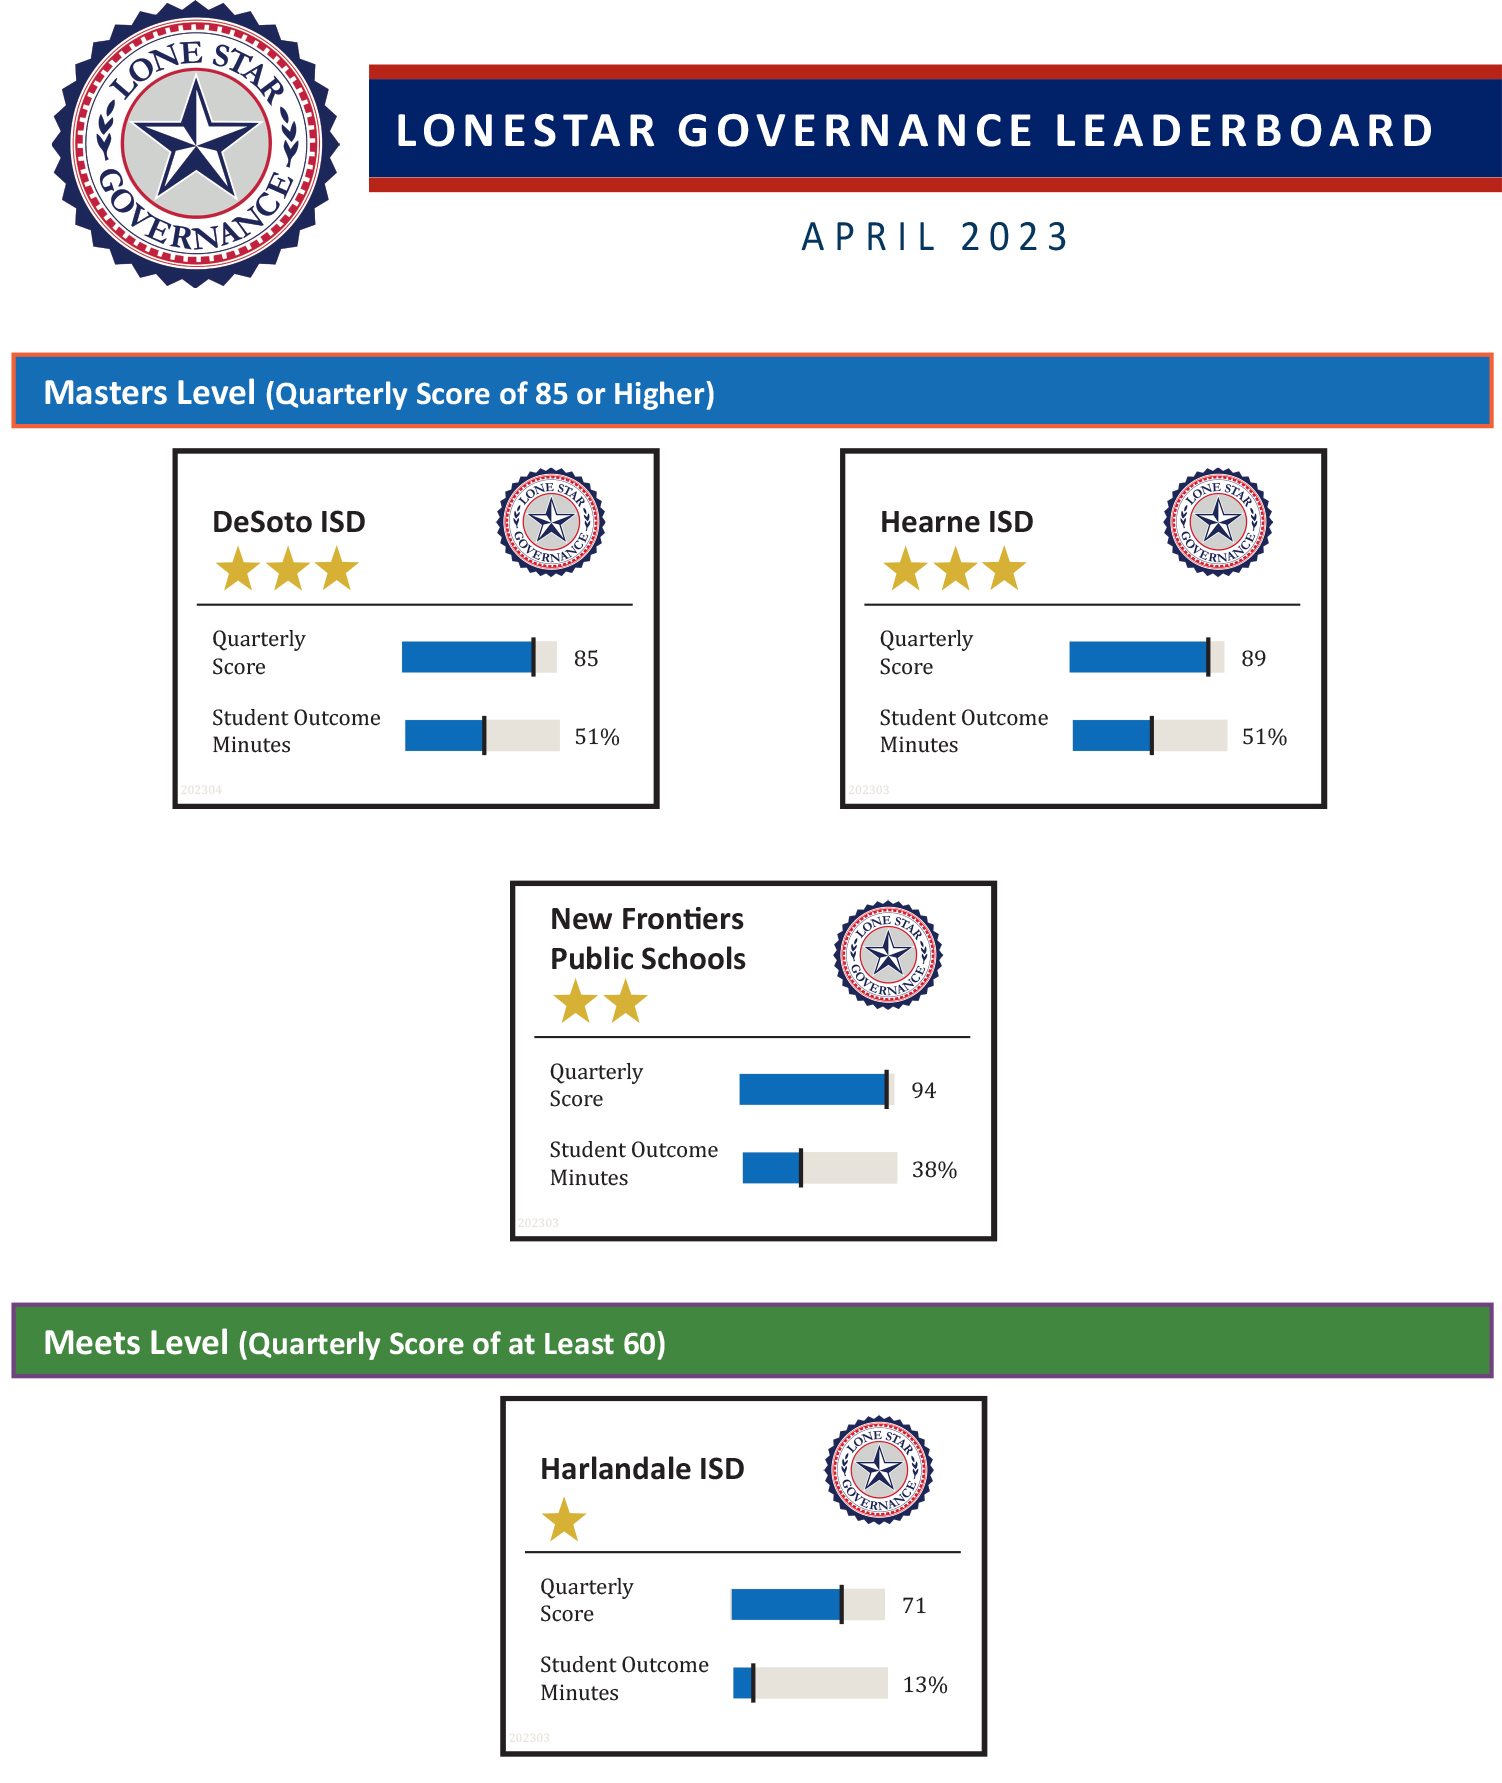 Lone Star Governance Leaderboard: March 2023, Masters Level (Quarterly Score of 85 or HIgher): Hearn ISD Quarterly Score: 89 and Student Outcome MInutes: 51%